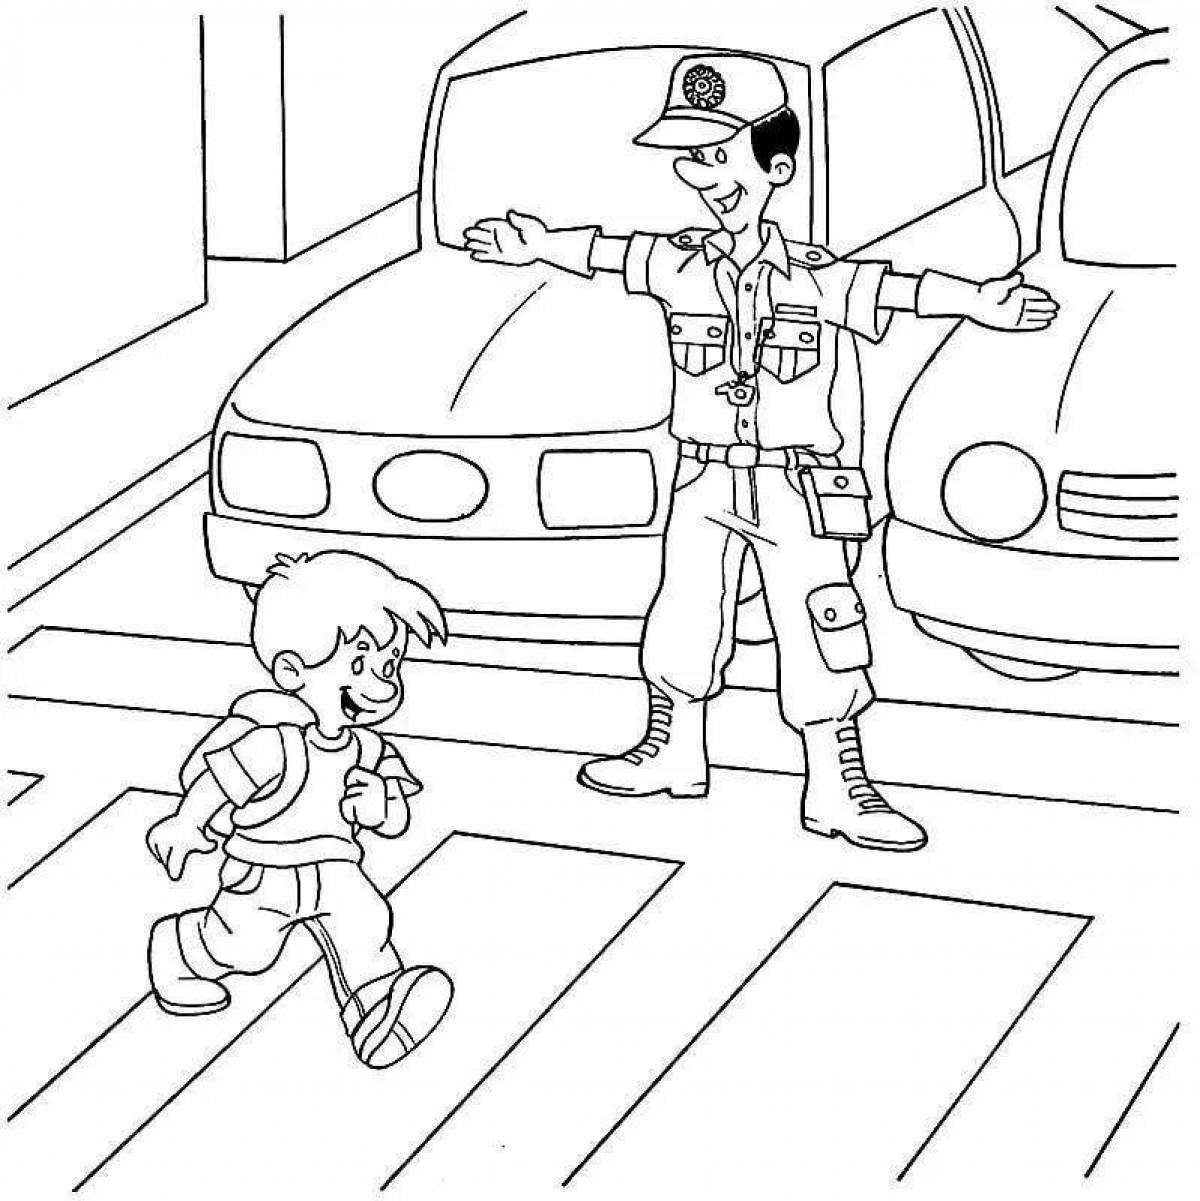 Fun me and my dad coloring page for safe roads